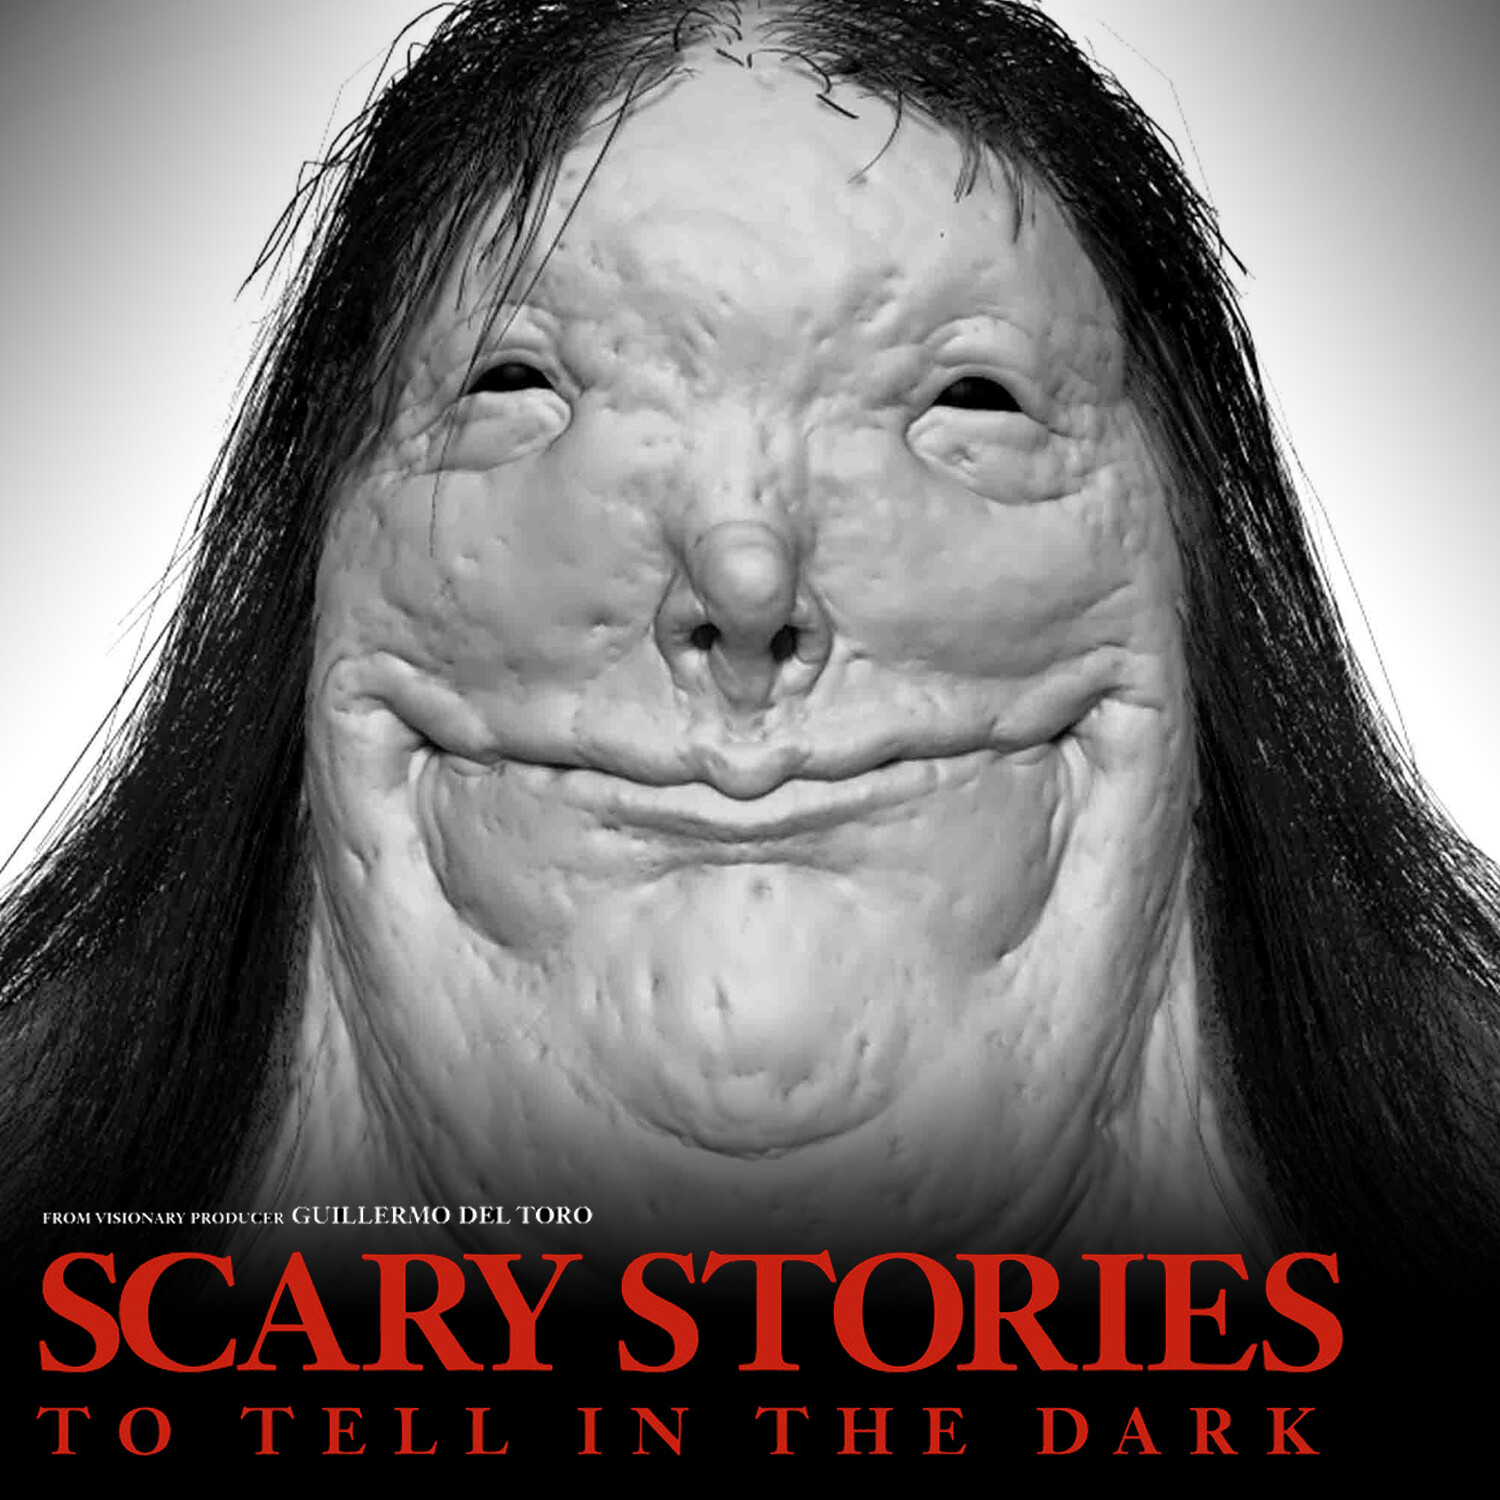 Mauricio Ruiz Design - Scary Stories to Tell in the Dark - The Pale Lady